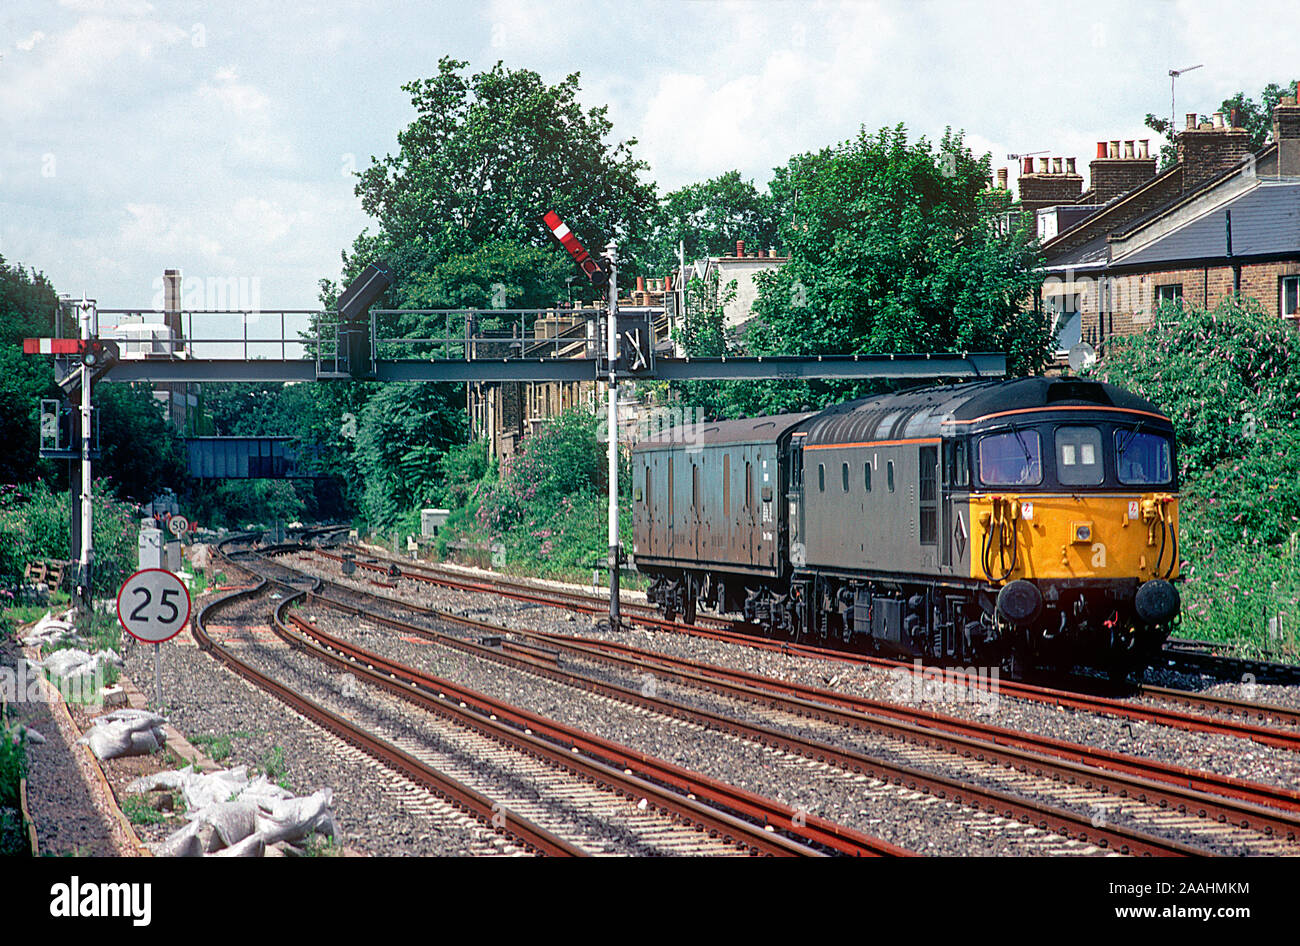 A class 33 Crompton diesel locomotive number 33101 heads through Kensington Olympia with a single mail van in tow. Stock Photo